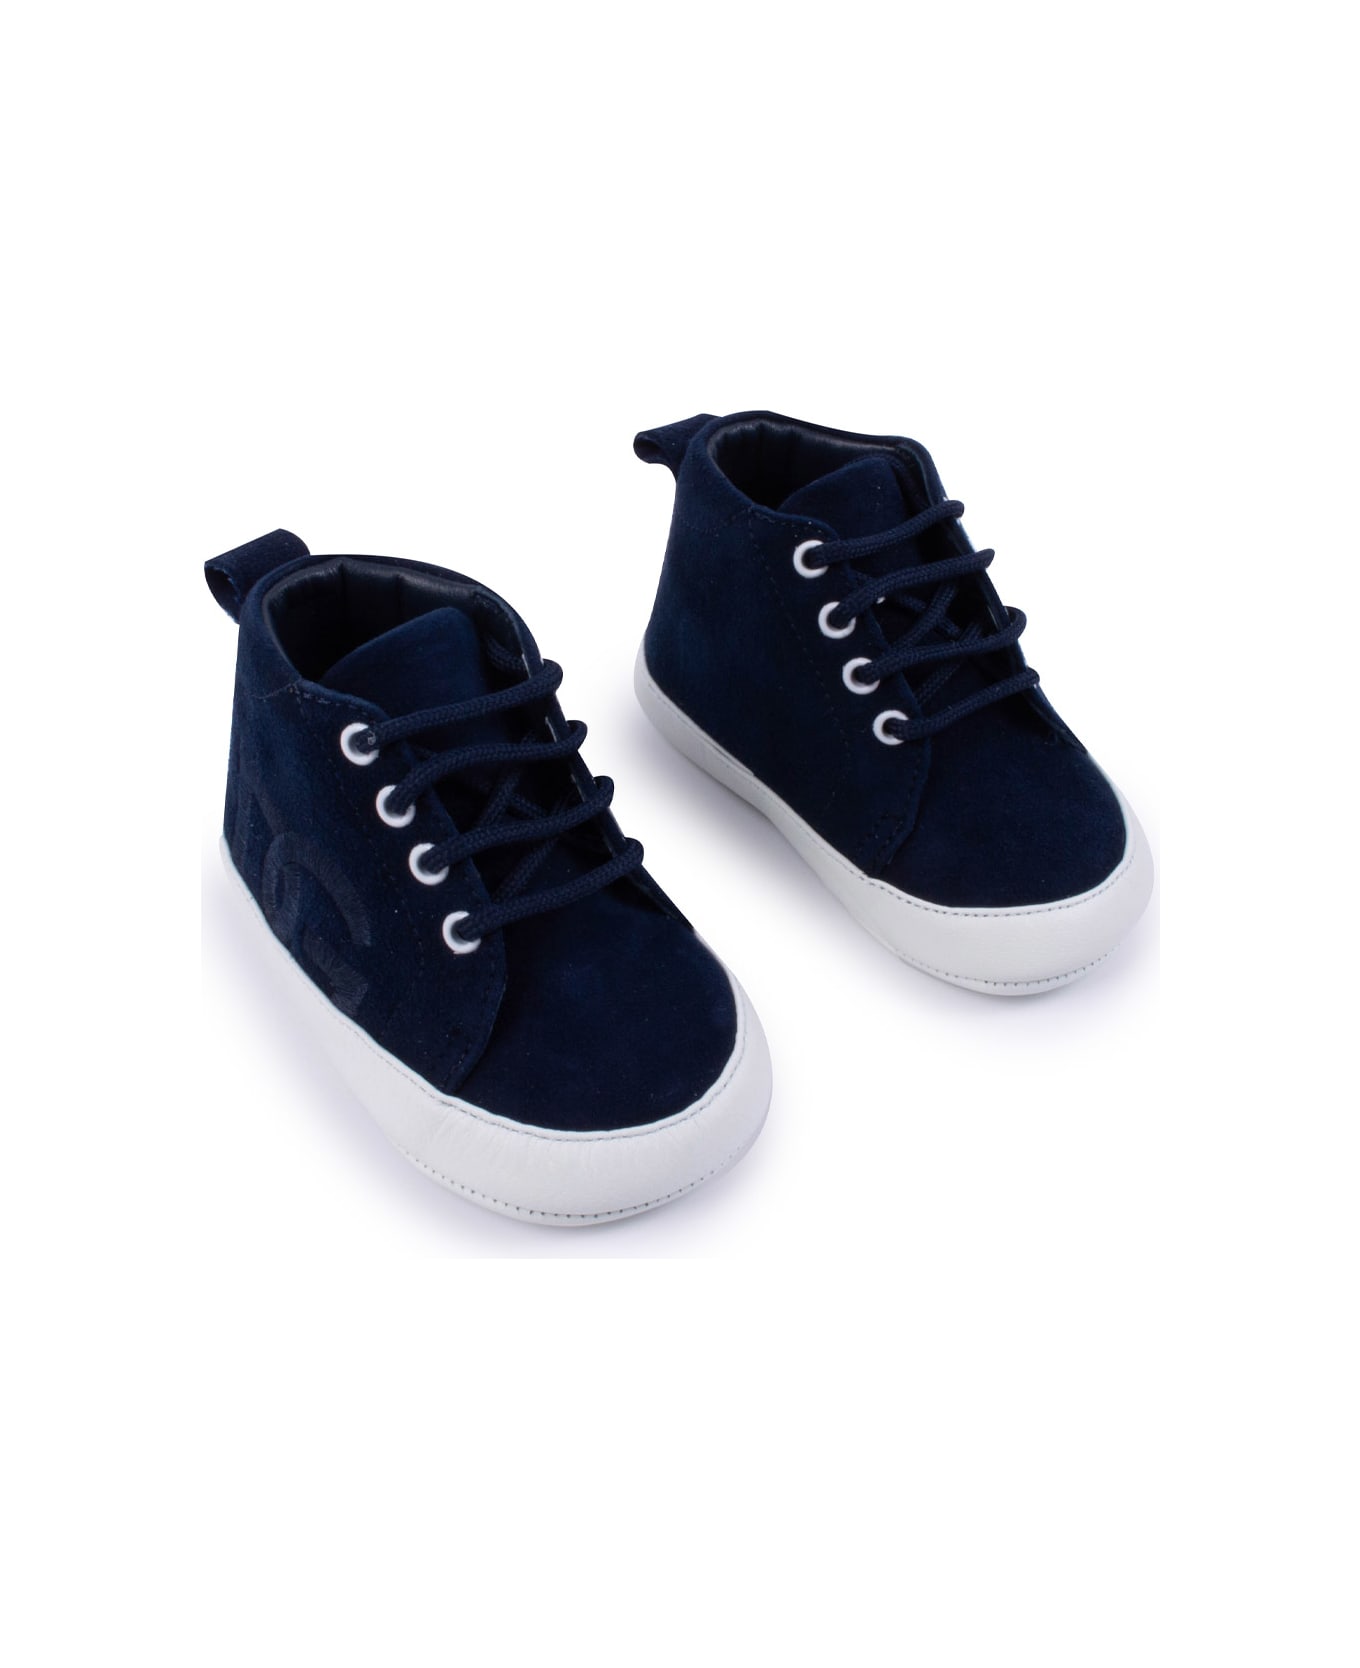 Dolce & Gabbana Suede Sneakers With Dg Logo Embroidery - Blue